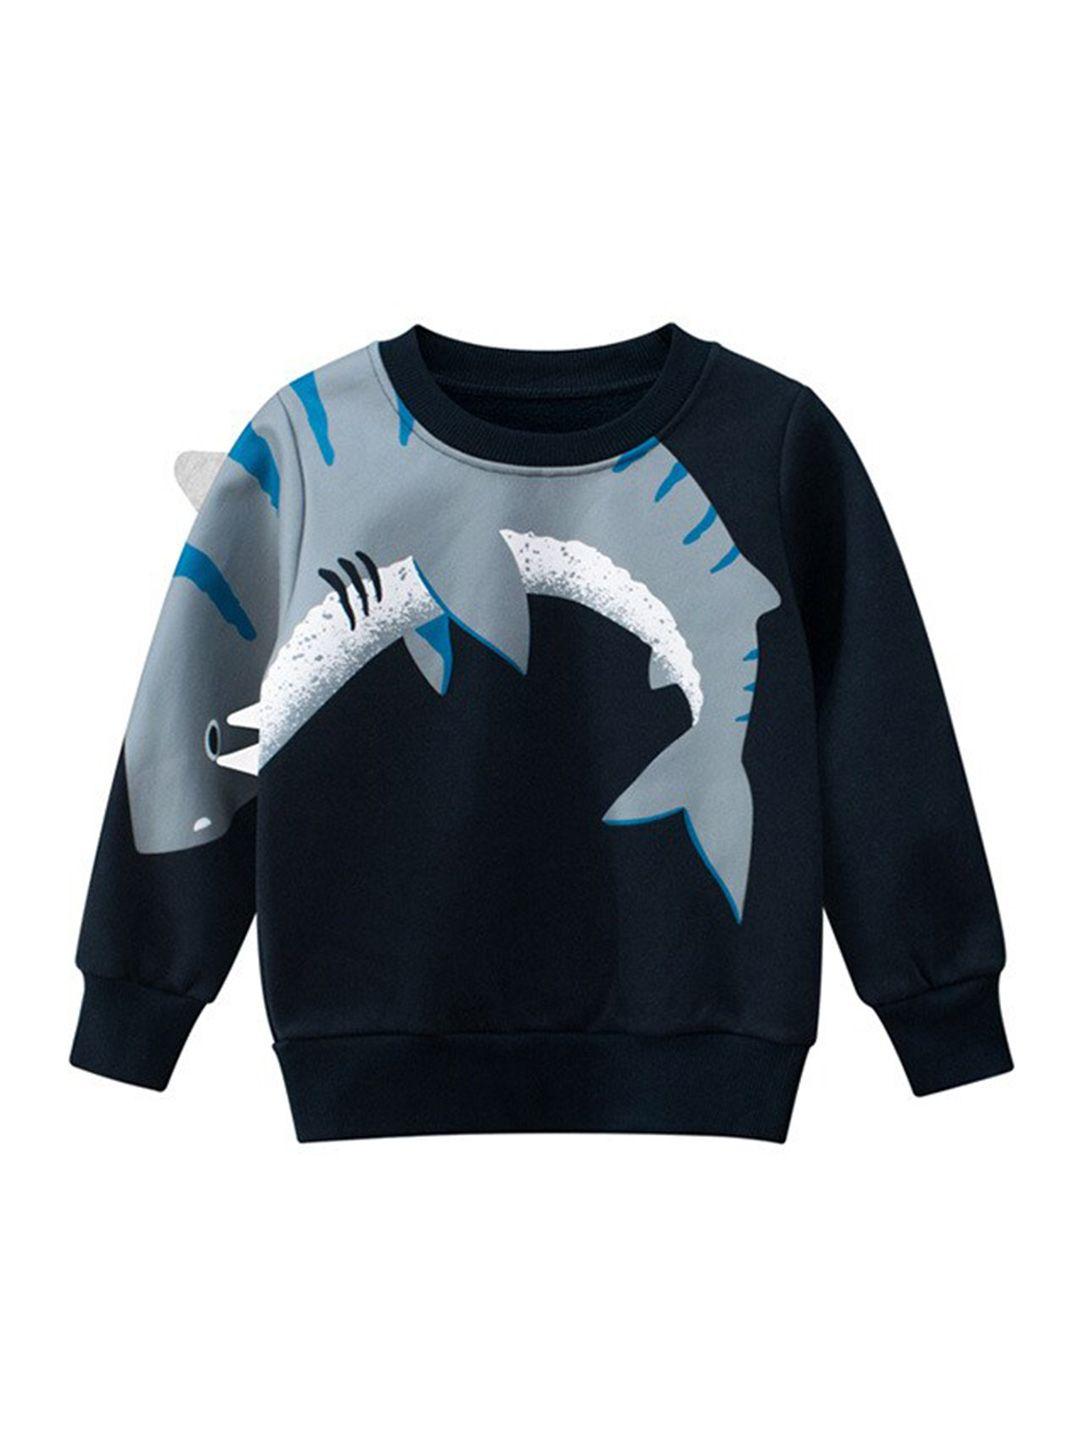 stylecast boys navy blue graphic printed ribbed cotton pullover